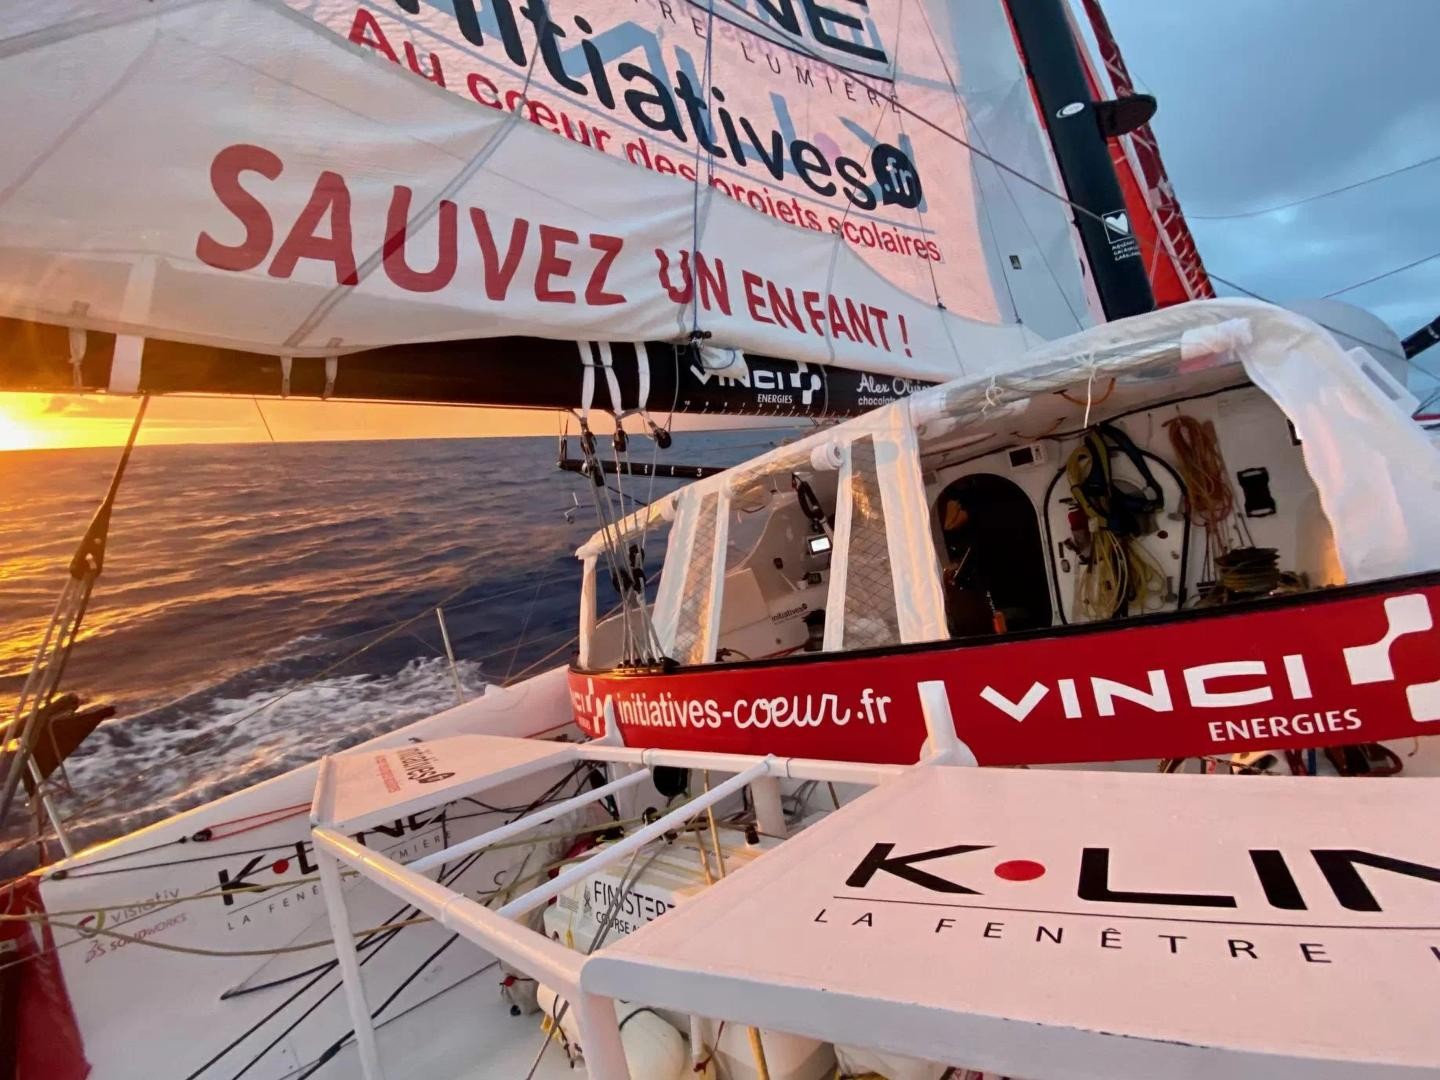 Vendée Globe 2020: the not too distant roar of the forties